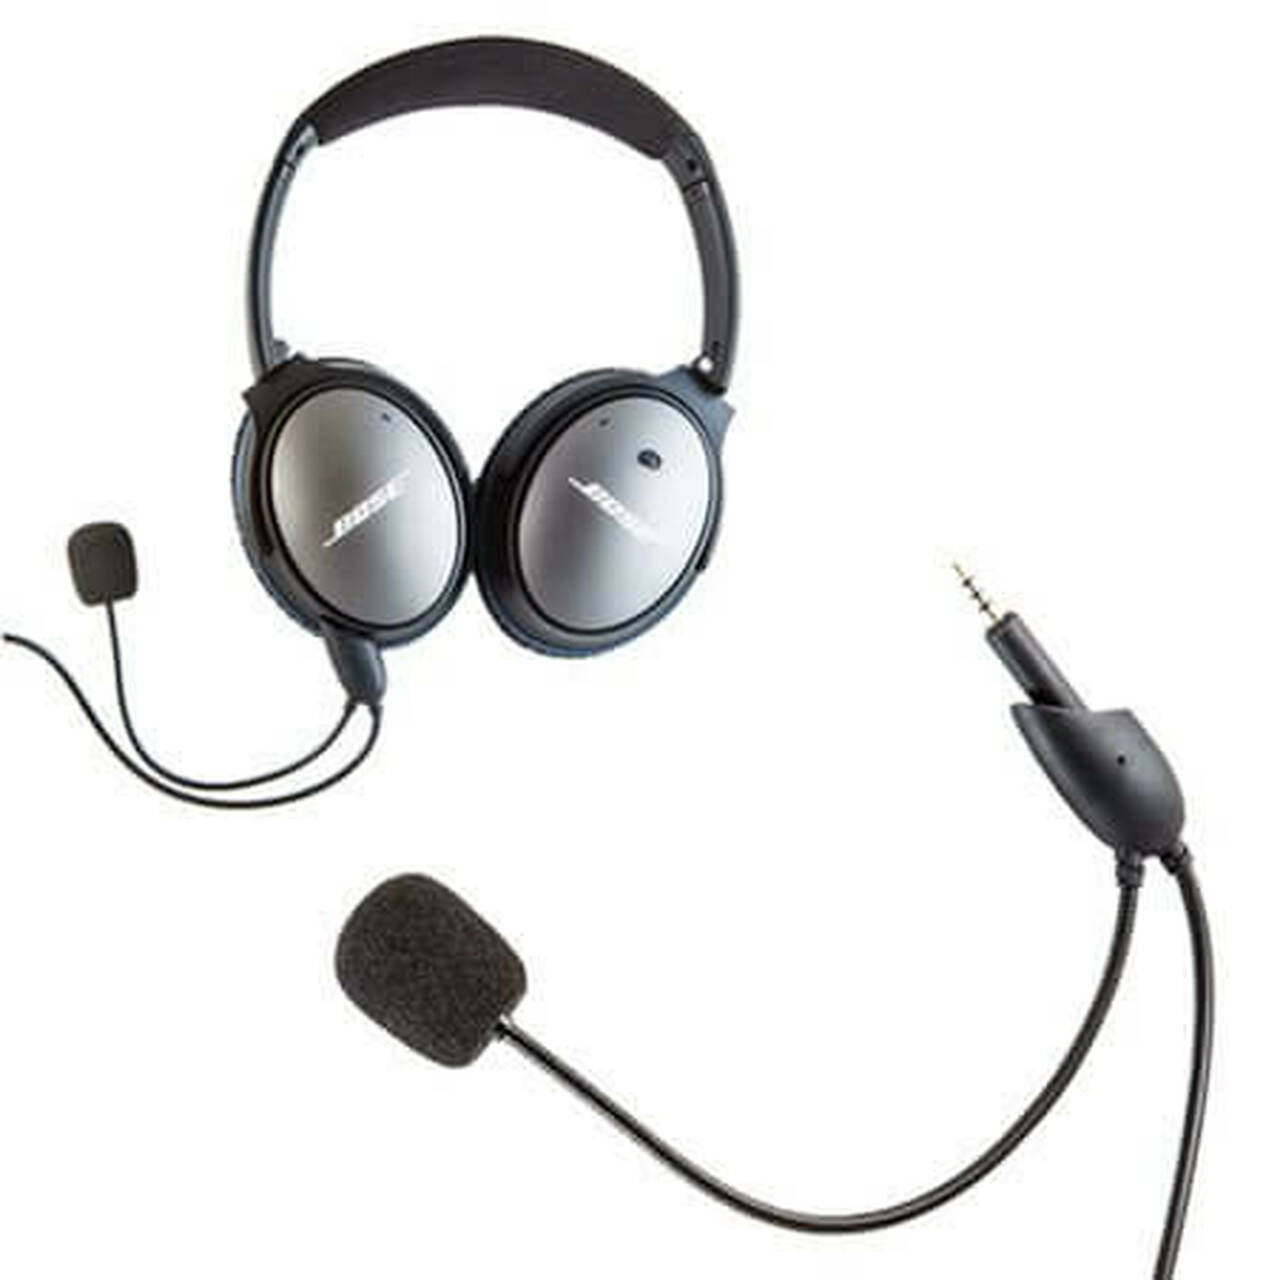 Headset Buddy ClearMic Noise Cancelling Bose QC25 Boom Microphone